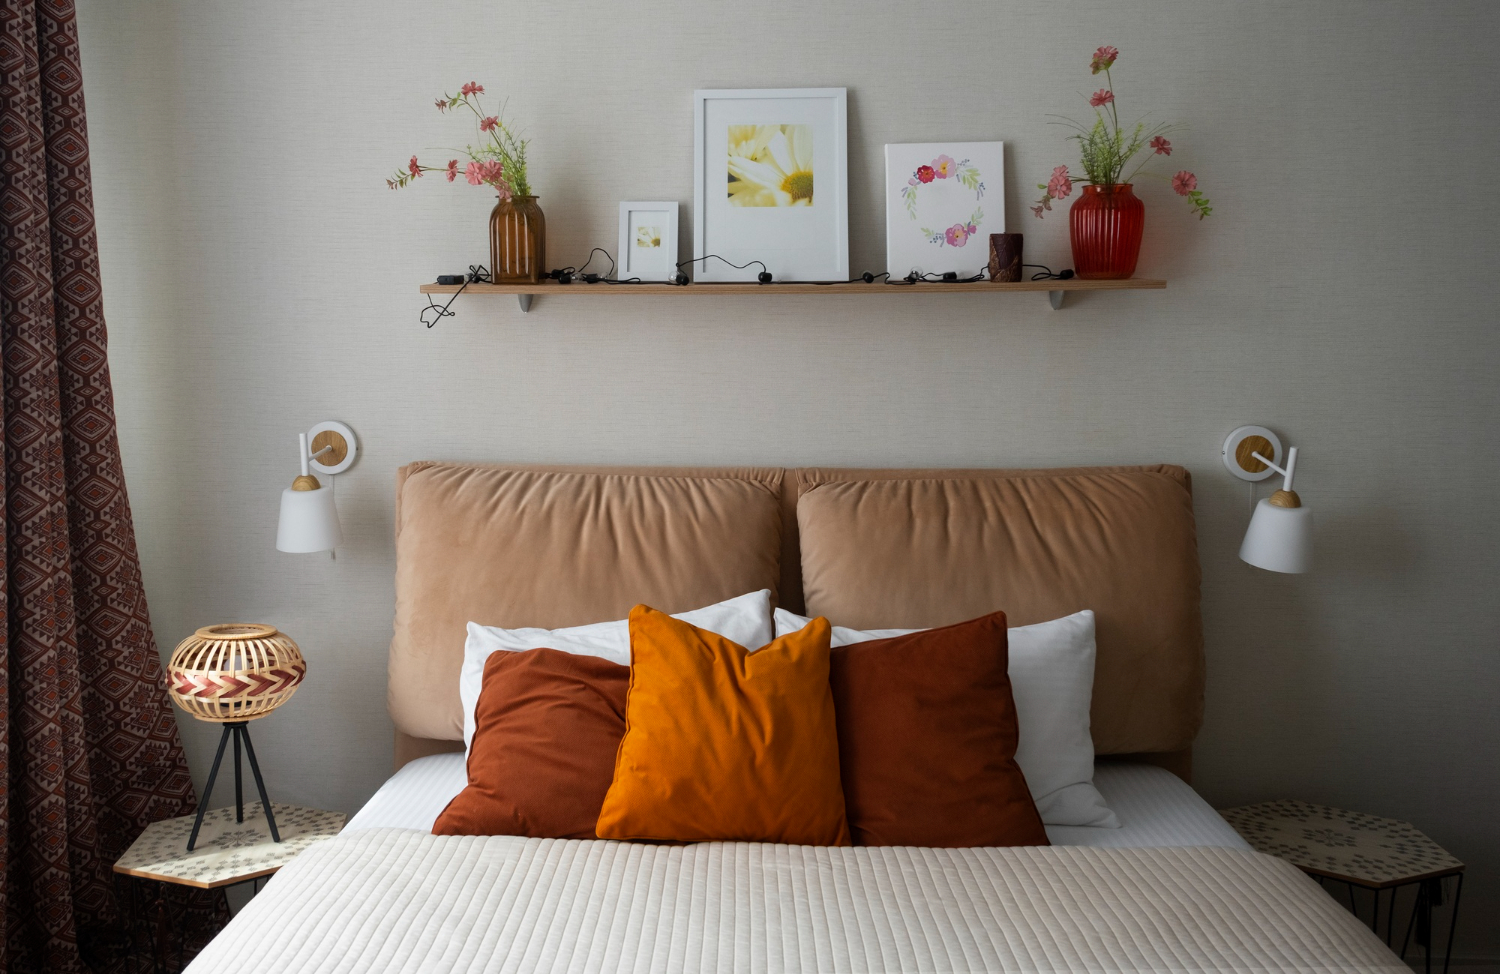 Budget-Friendly Bedroom Makeover Ideas 10 Creative and Cost-Effective Makeover Tips